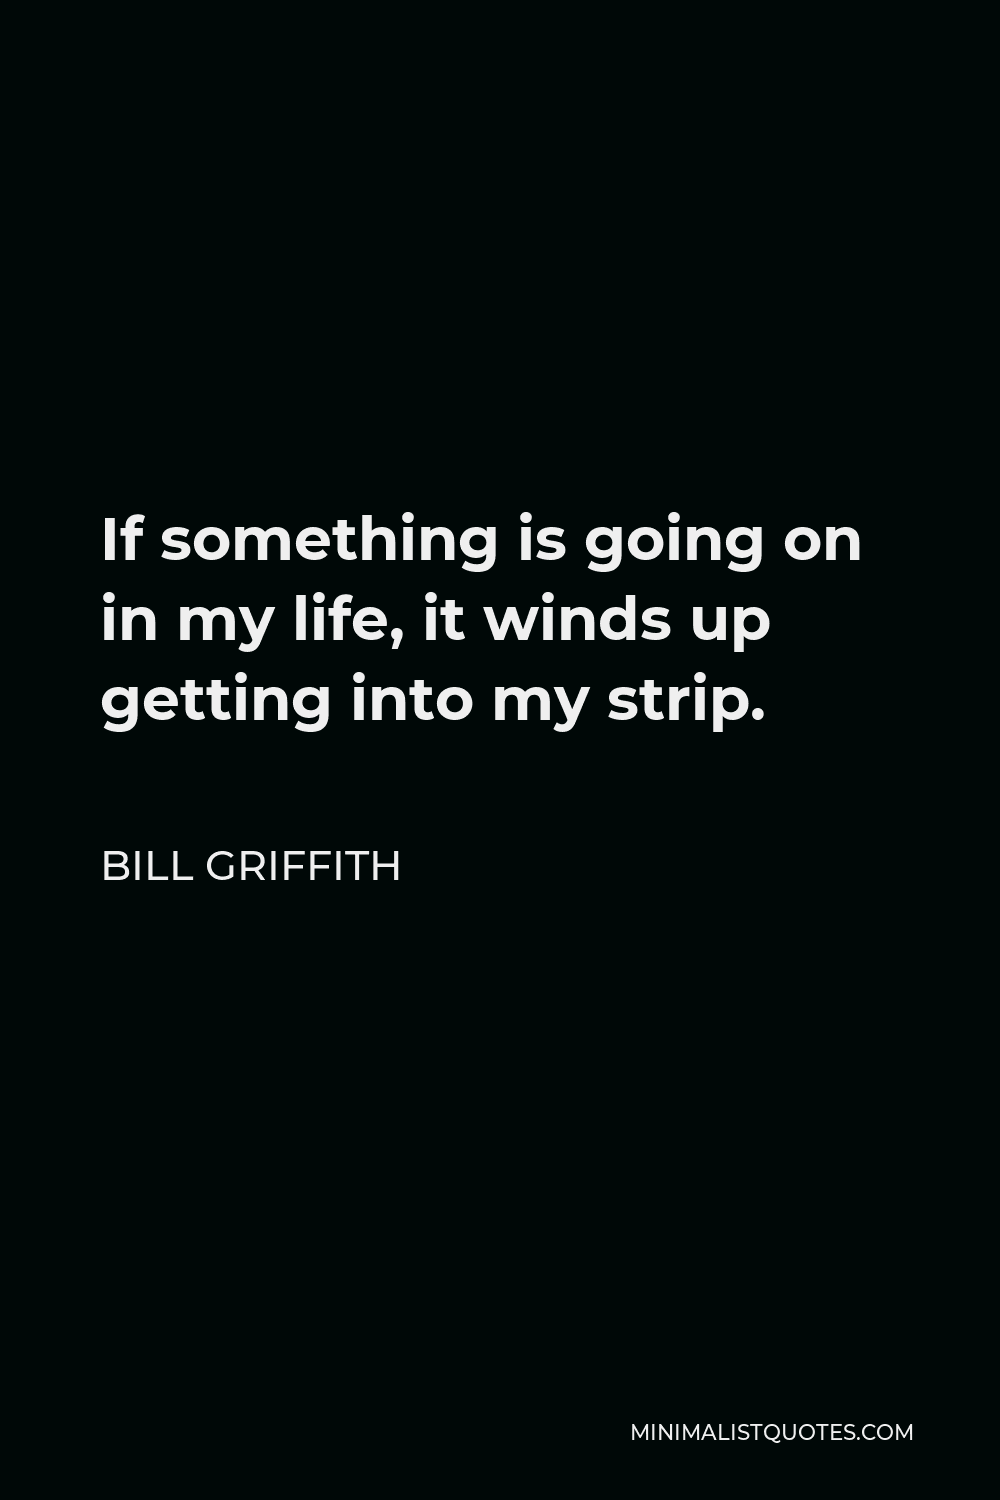 Bill Griffith Quote - If something is going on in my life, it winds up getting into my strip.